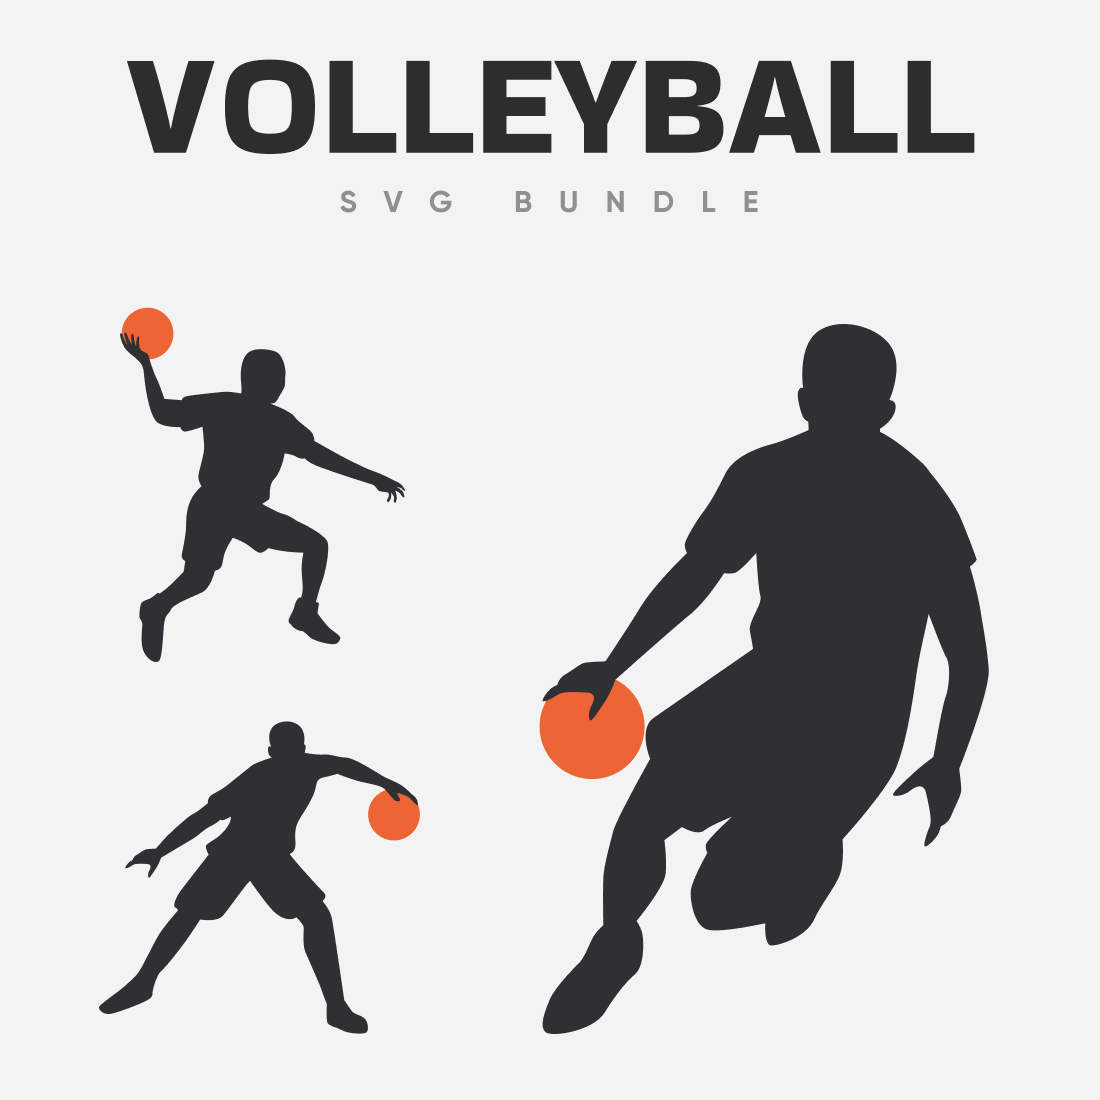 Volleyball SVG Bundle - Preview.